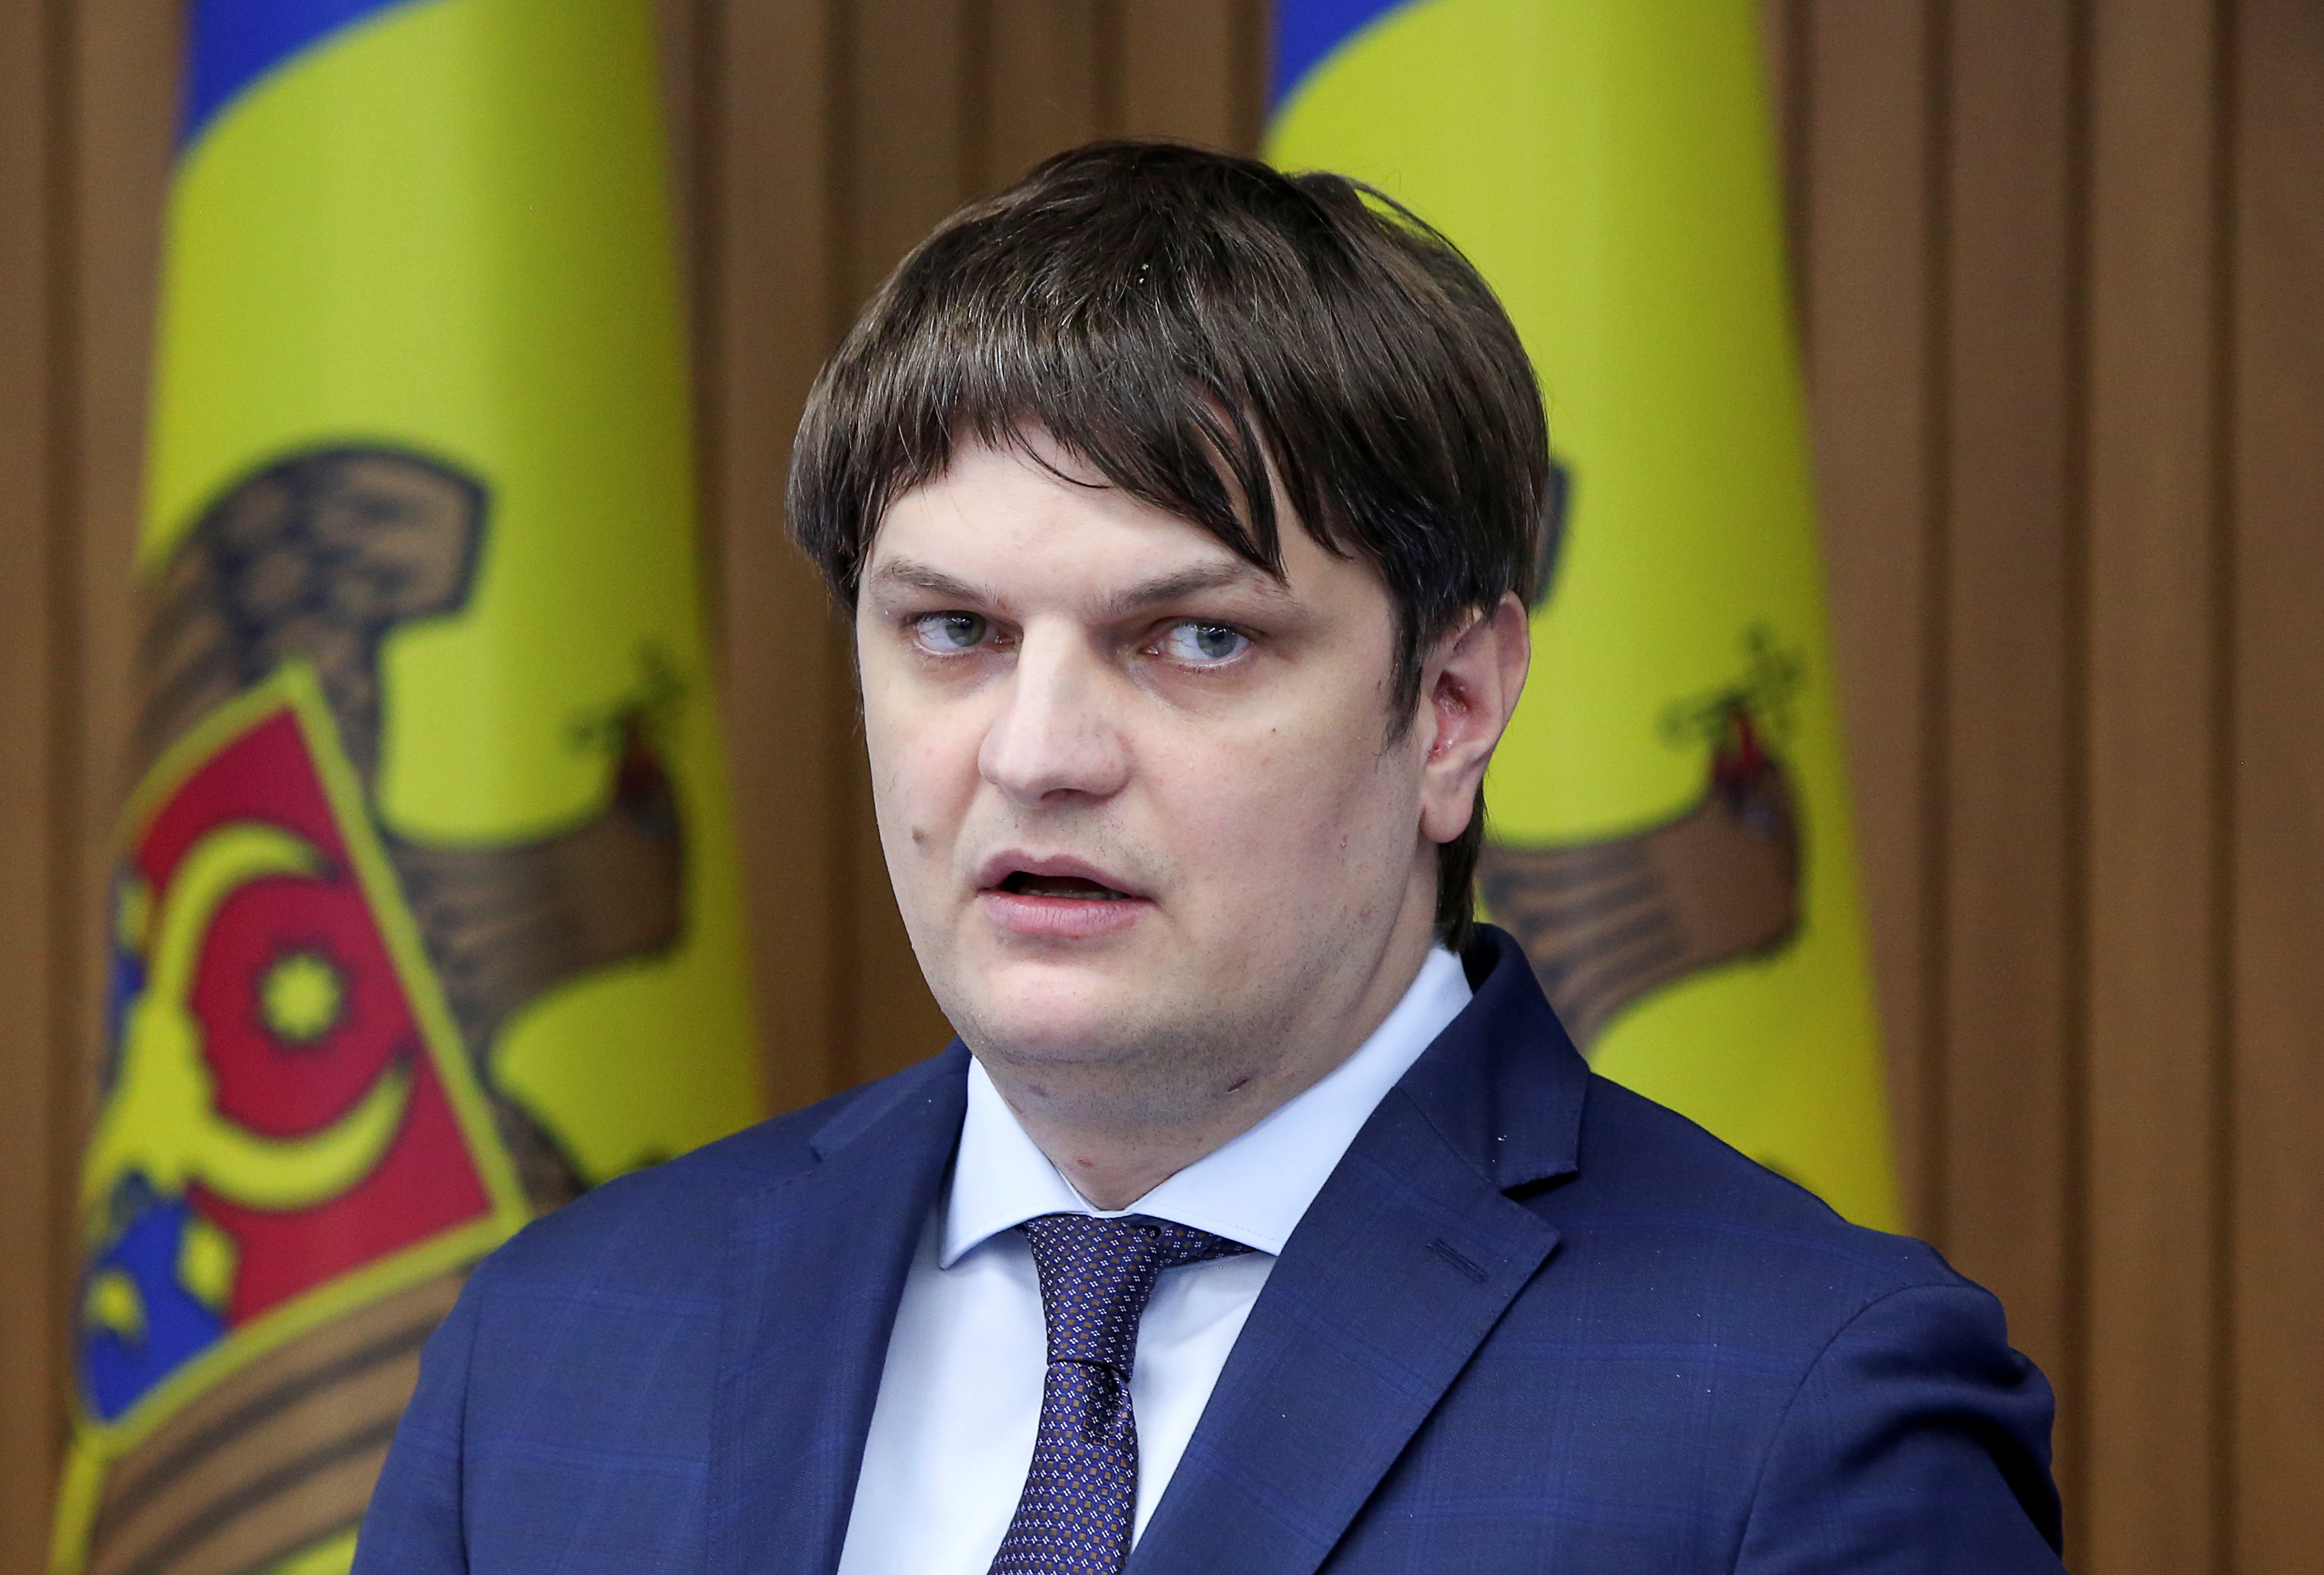 Moldovan Deputy Prime Minister Andrei Spinu attends a news conference in Chisinau